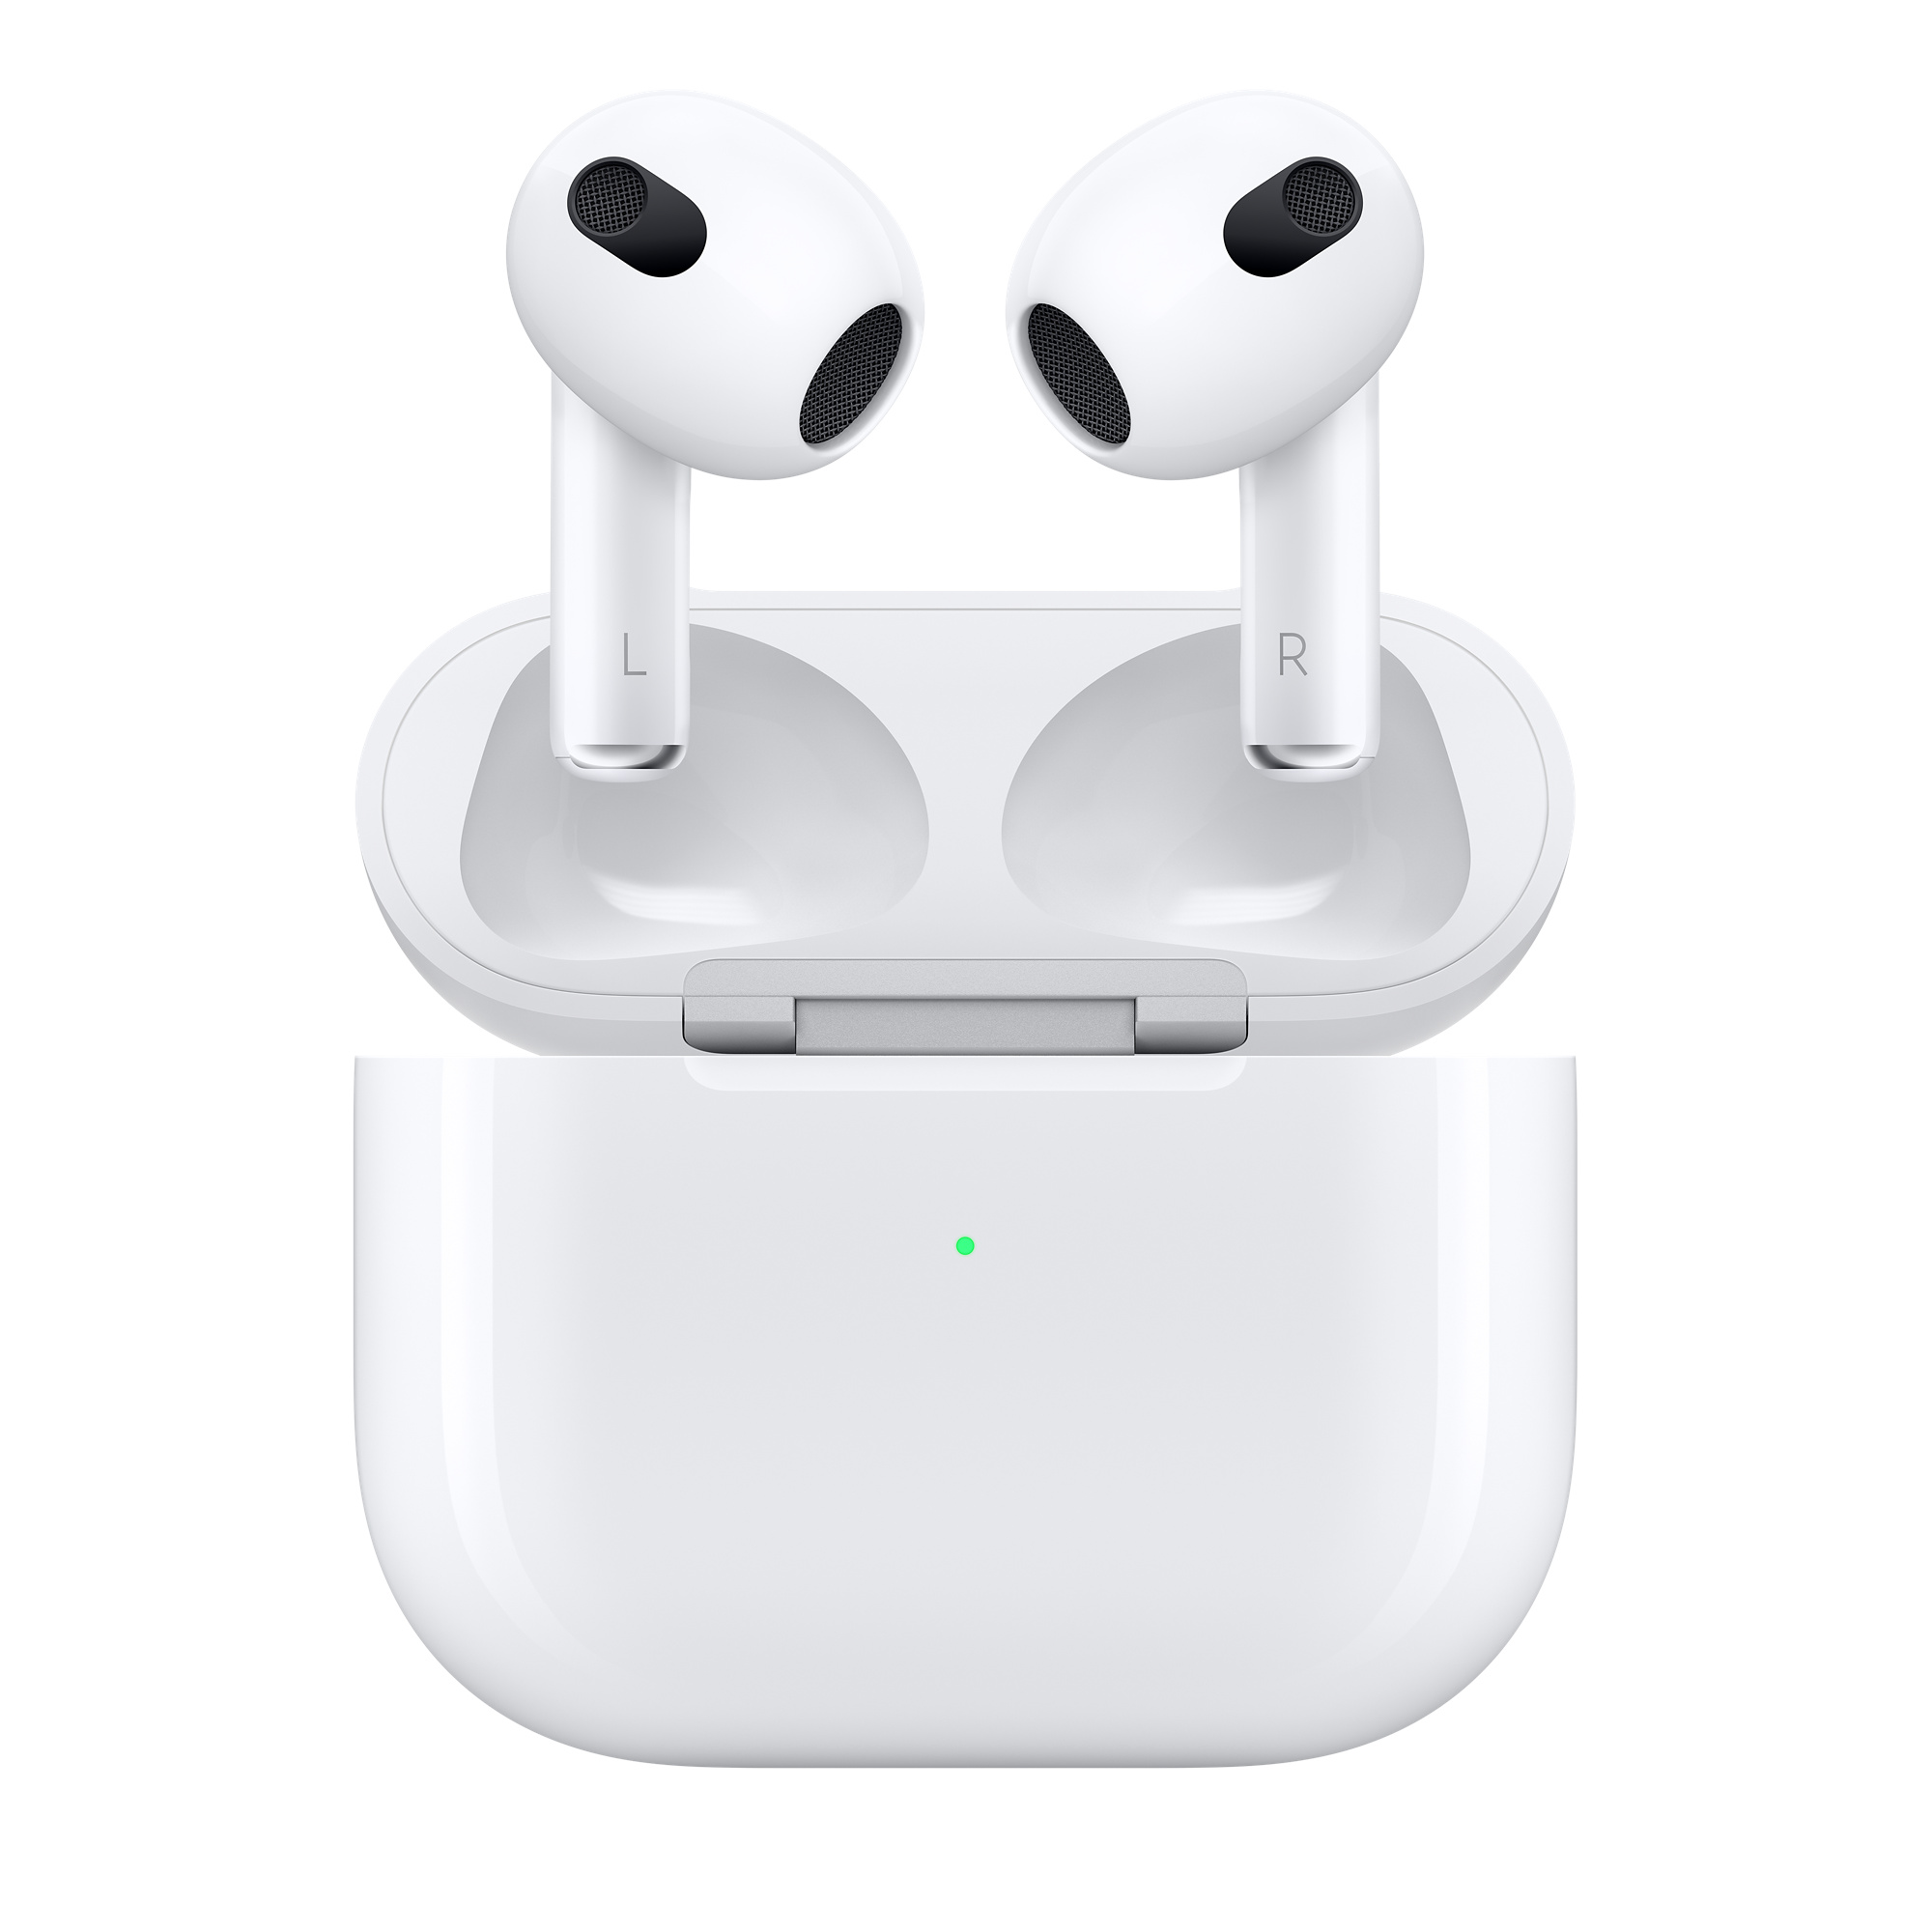 Apple’s 3rd generation of Airpods shows a much sleeker design than past models. 